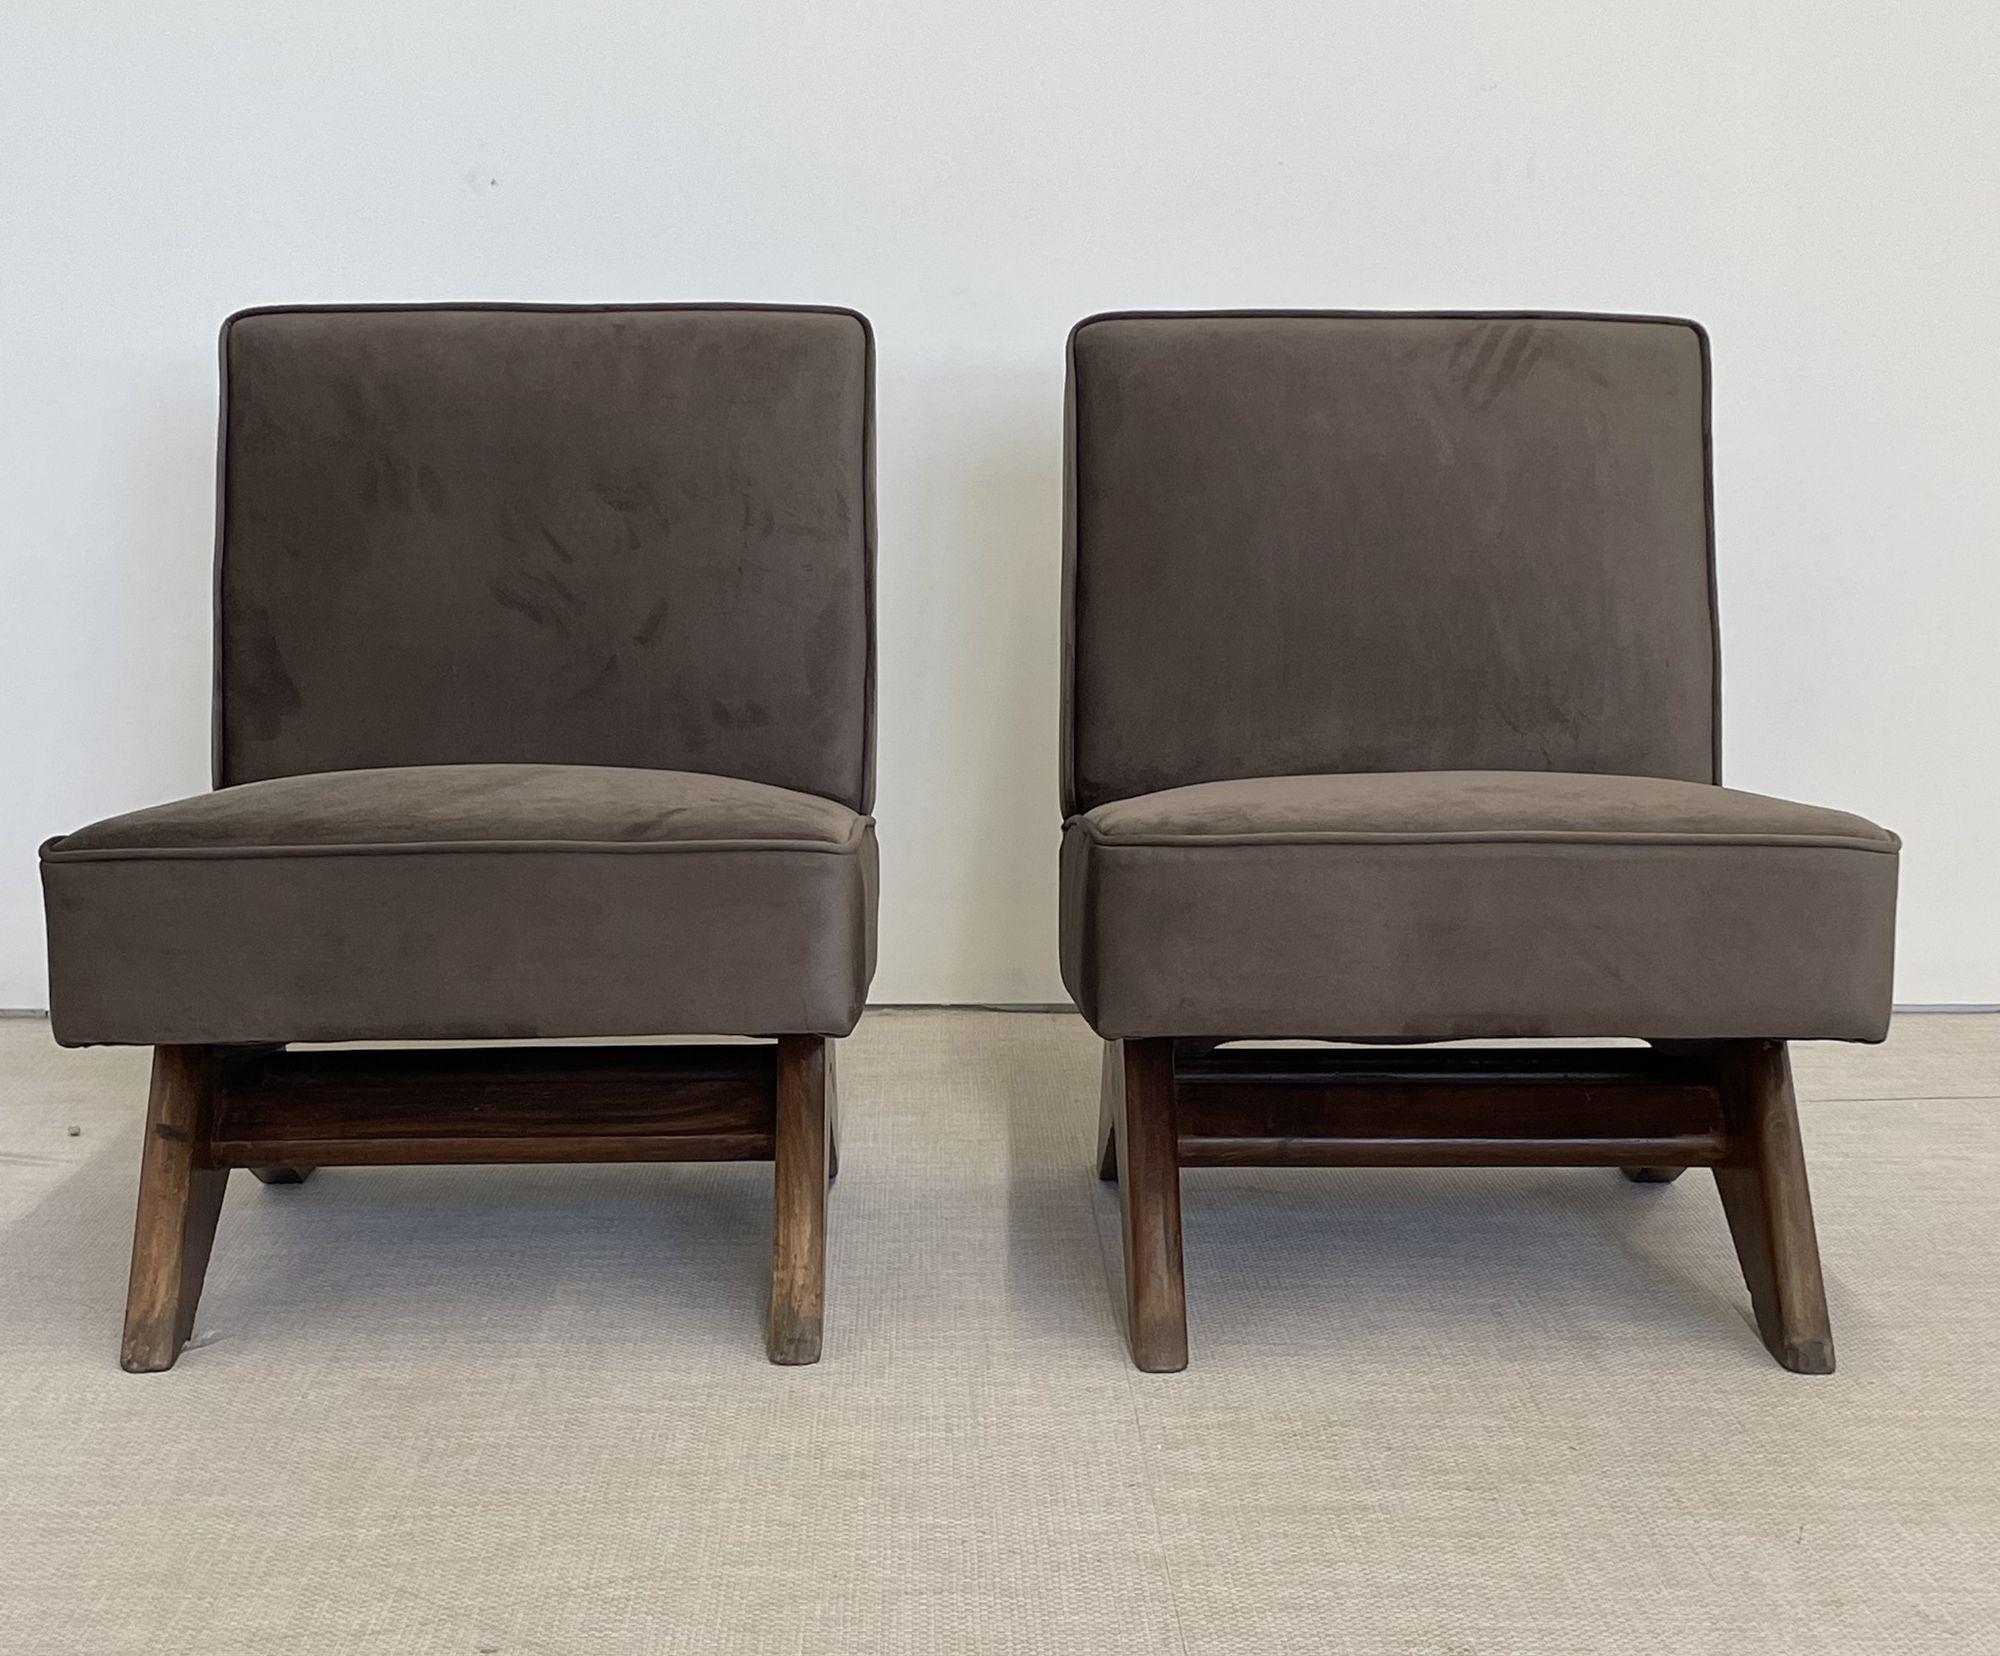 Pierre Jeanneret, French Mid-Century, Slipper Chairs, Teak, Fabric, India, 1960s 1